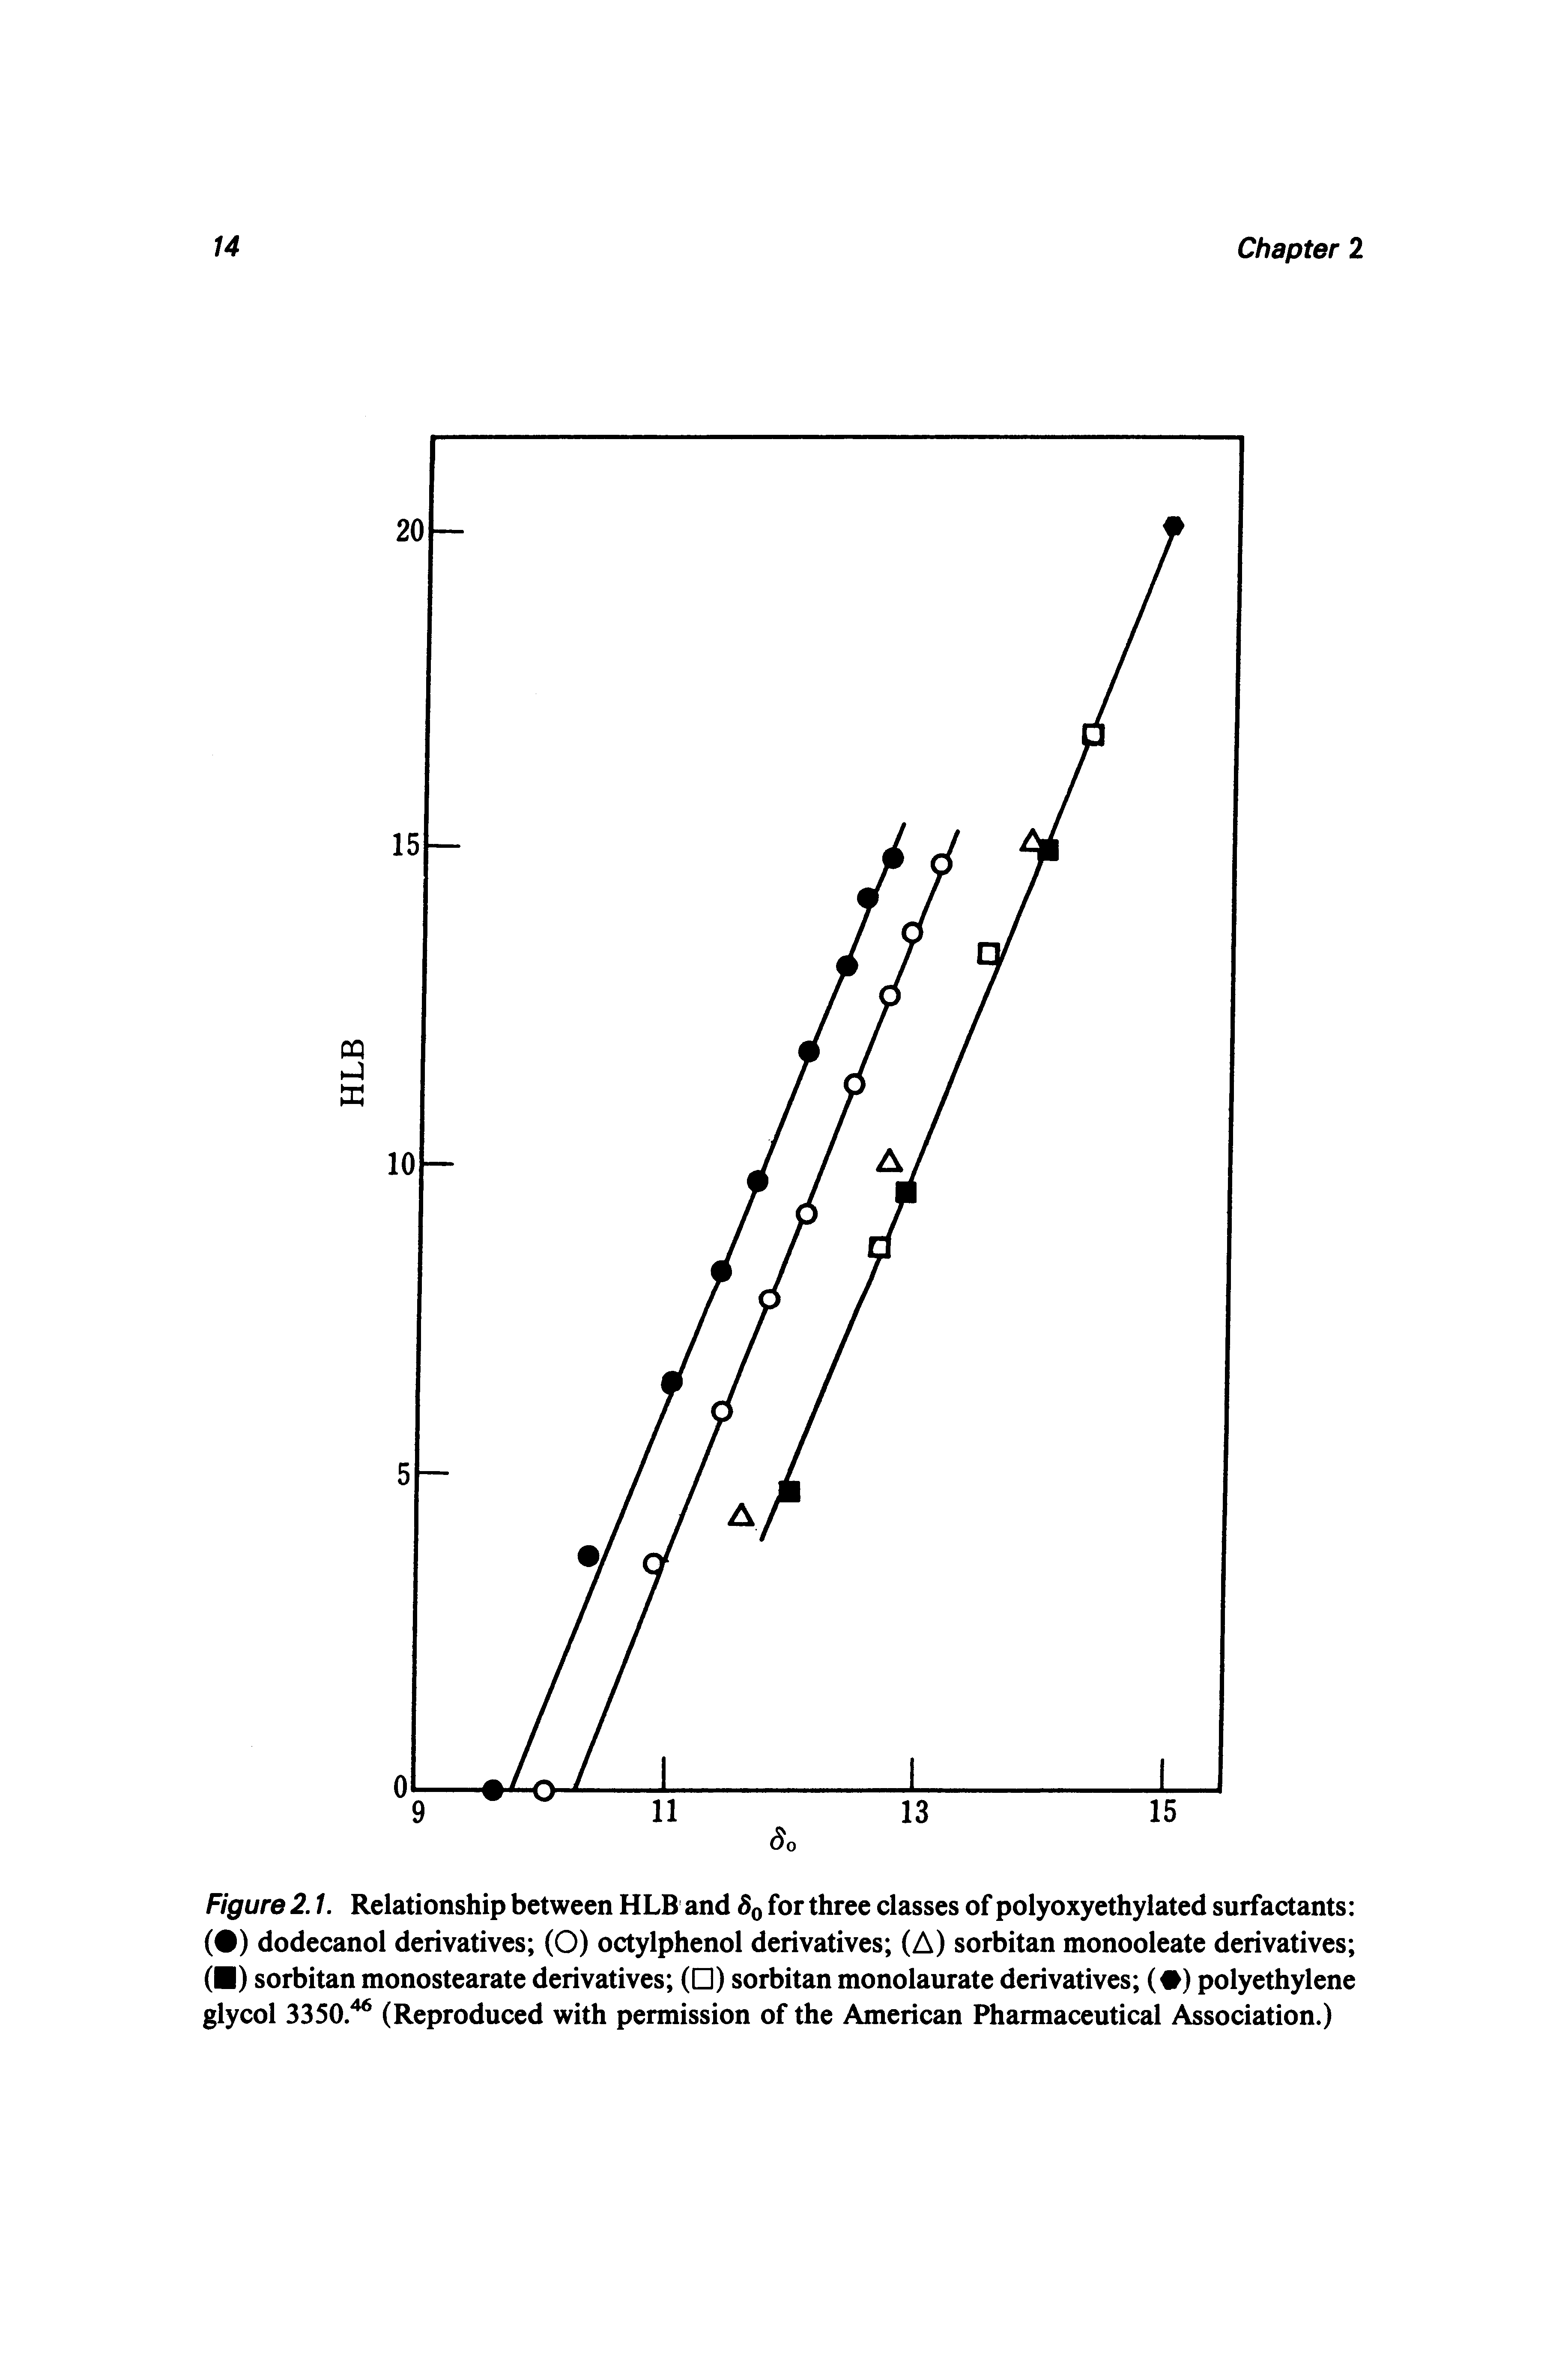 Figure 2.1. Relationship between HLB and 8q for three classes of polyoxyethylated surfactants ( ) dodecanol derivatives (O) octylphenol derivatives (A) sorbitan monooleate derivatives ( ) sorbitan monostearate derivatives ( ) sorbitan monolaurate derivatives ( ) polyethylene glycol 3350." (Reproduced with permission of the American Pharmaceutical Association.)...